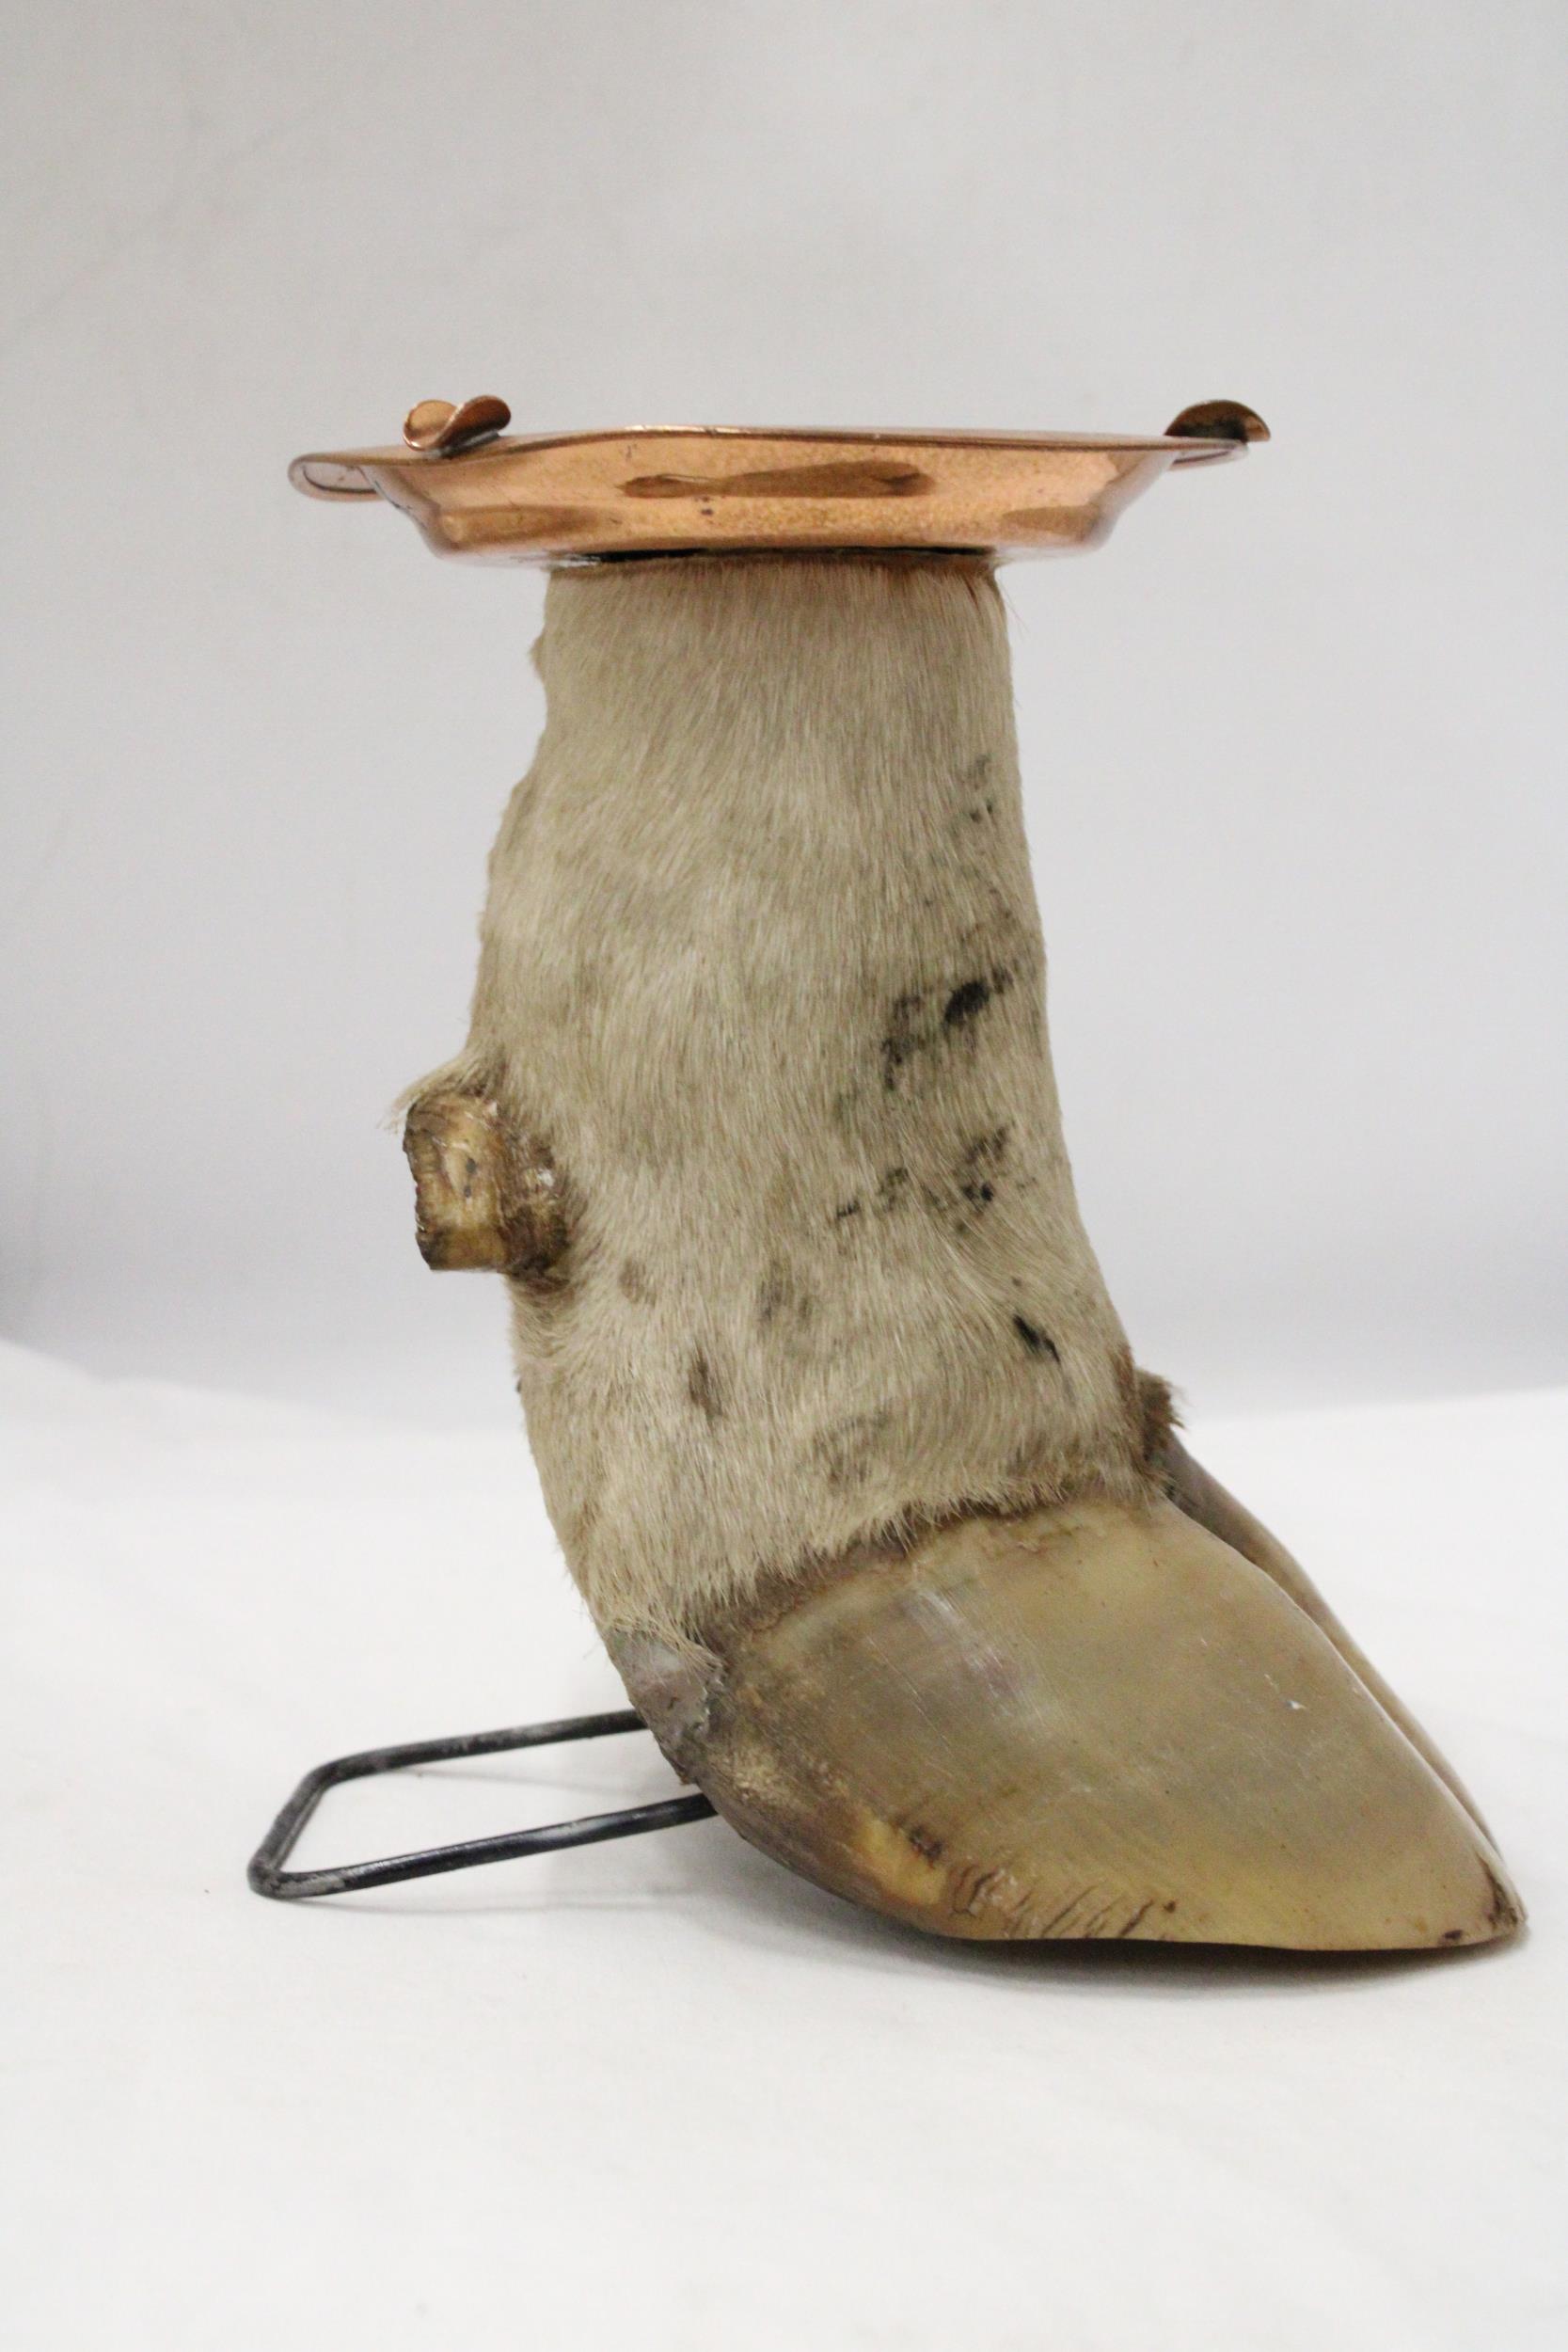 A COWS HOOF WITH COPPER ASHTRAY - Image 3 of 6